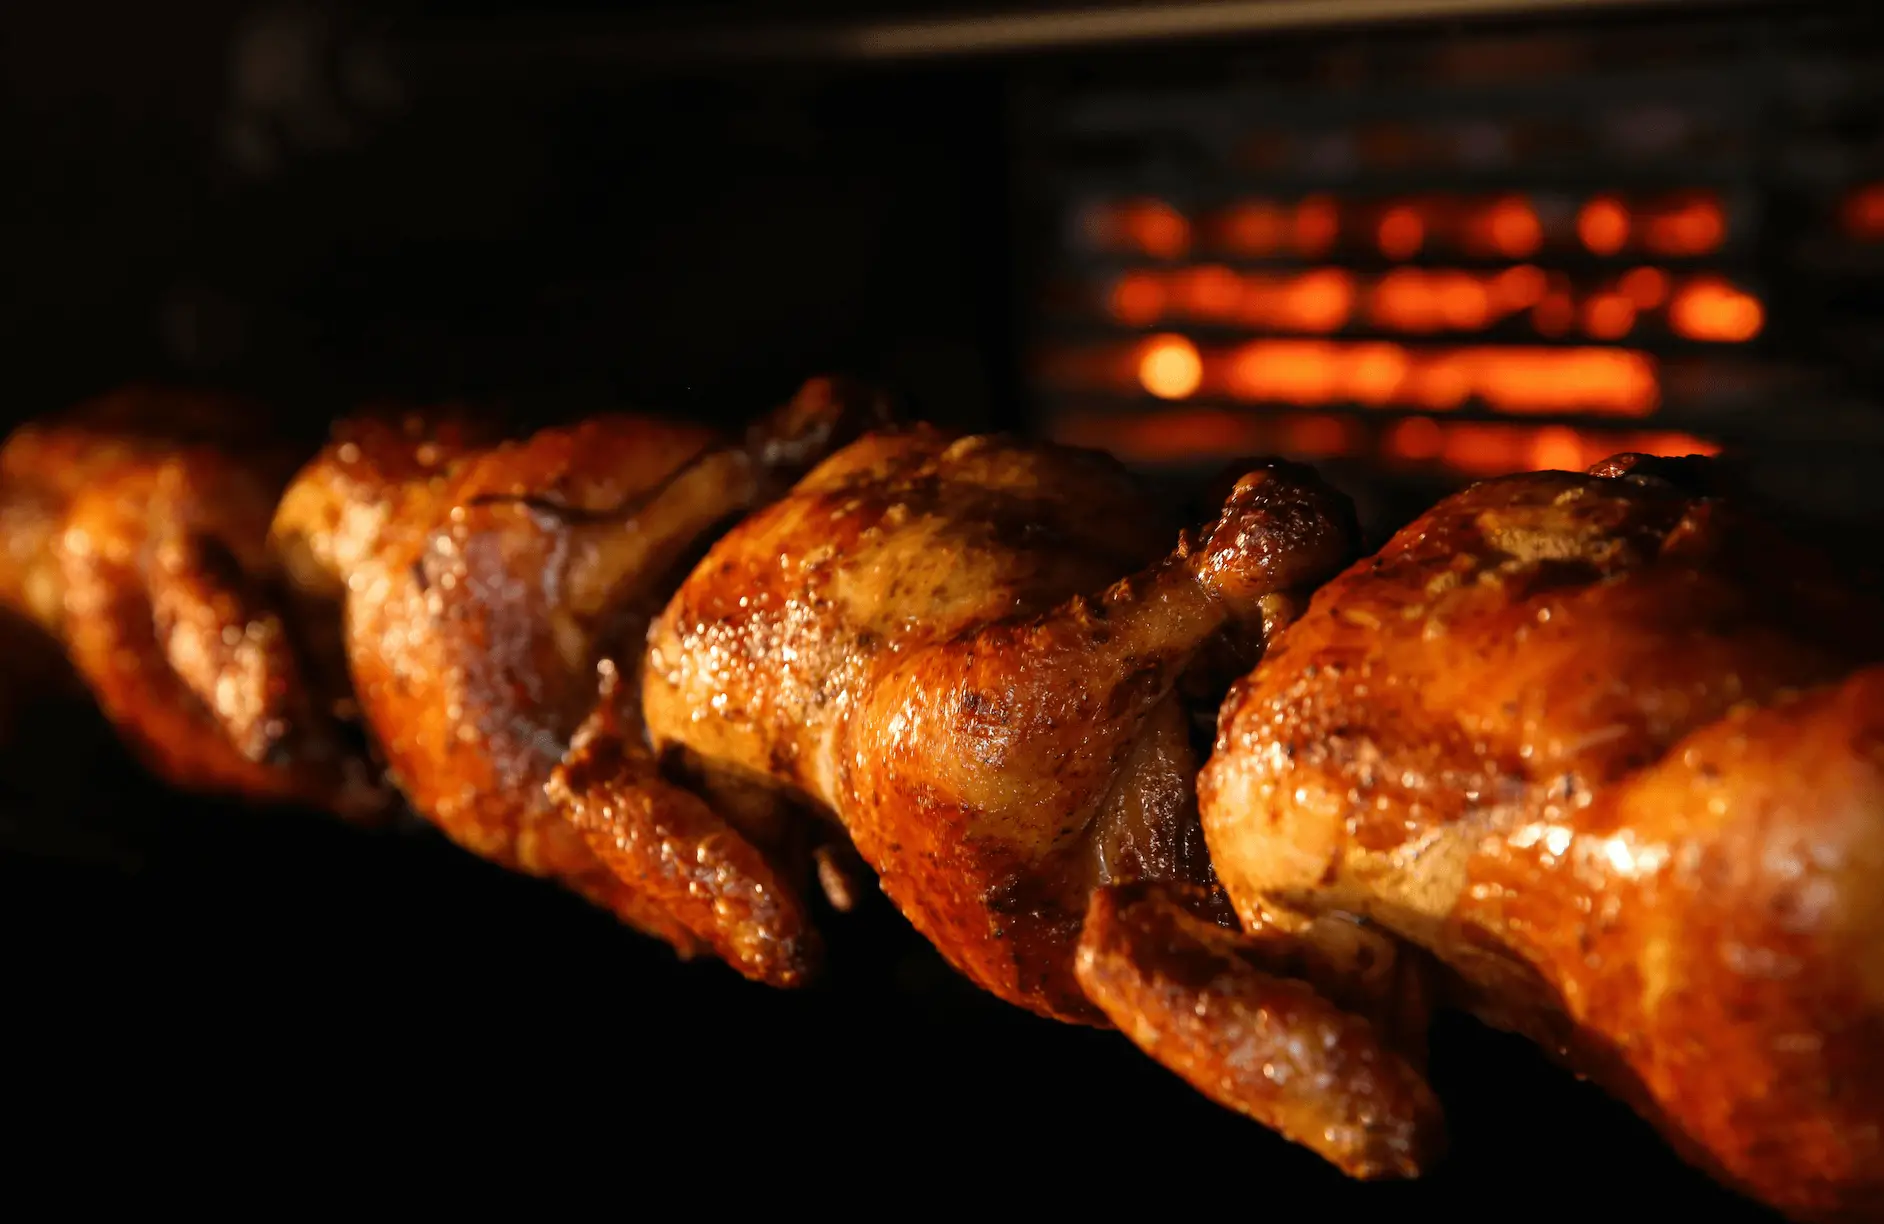 Best Grill With Rotisserie – Our Top Choices and Buyer’s Guide